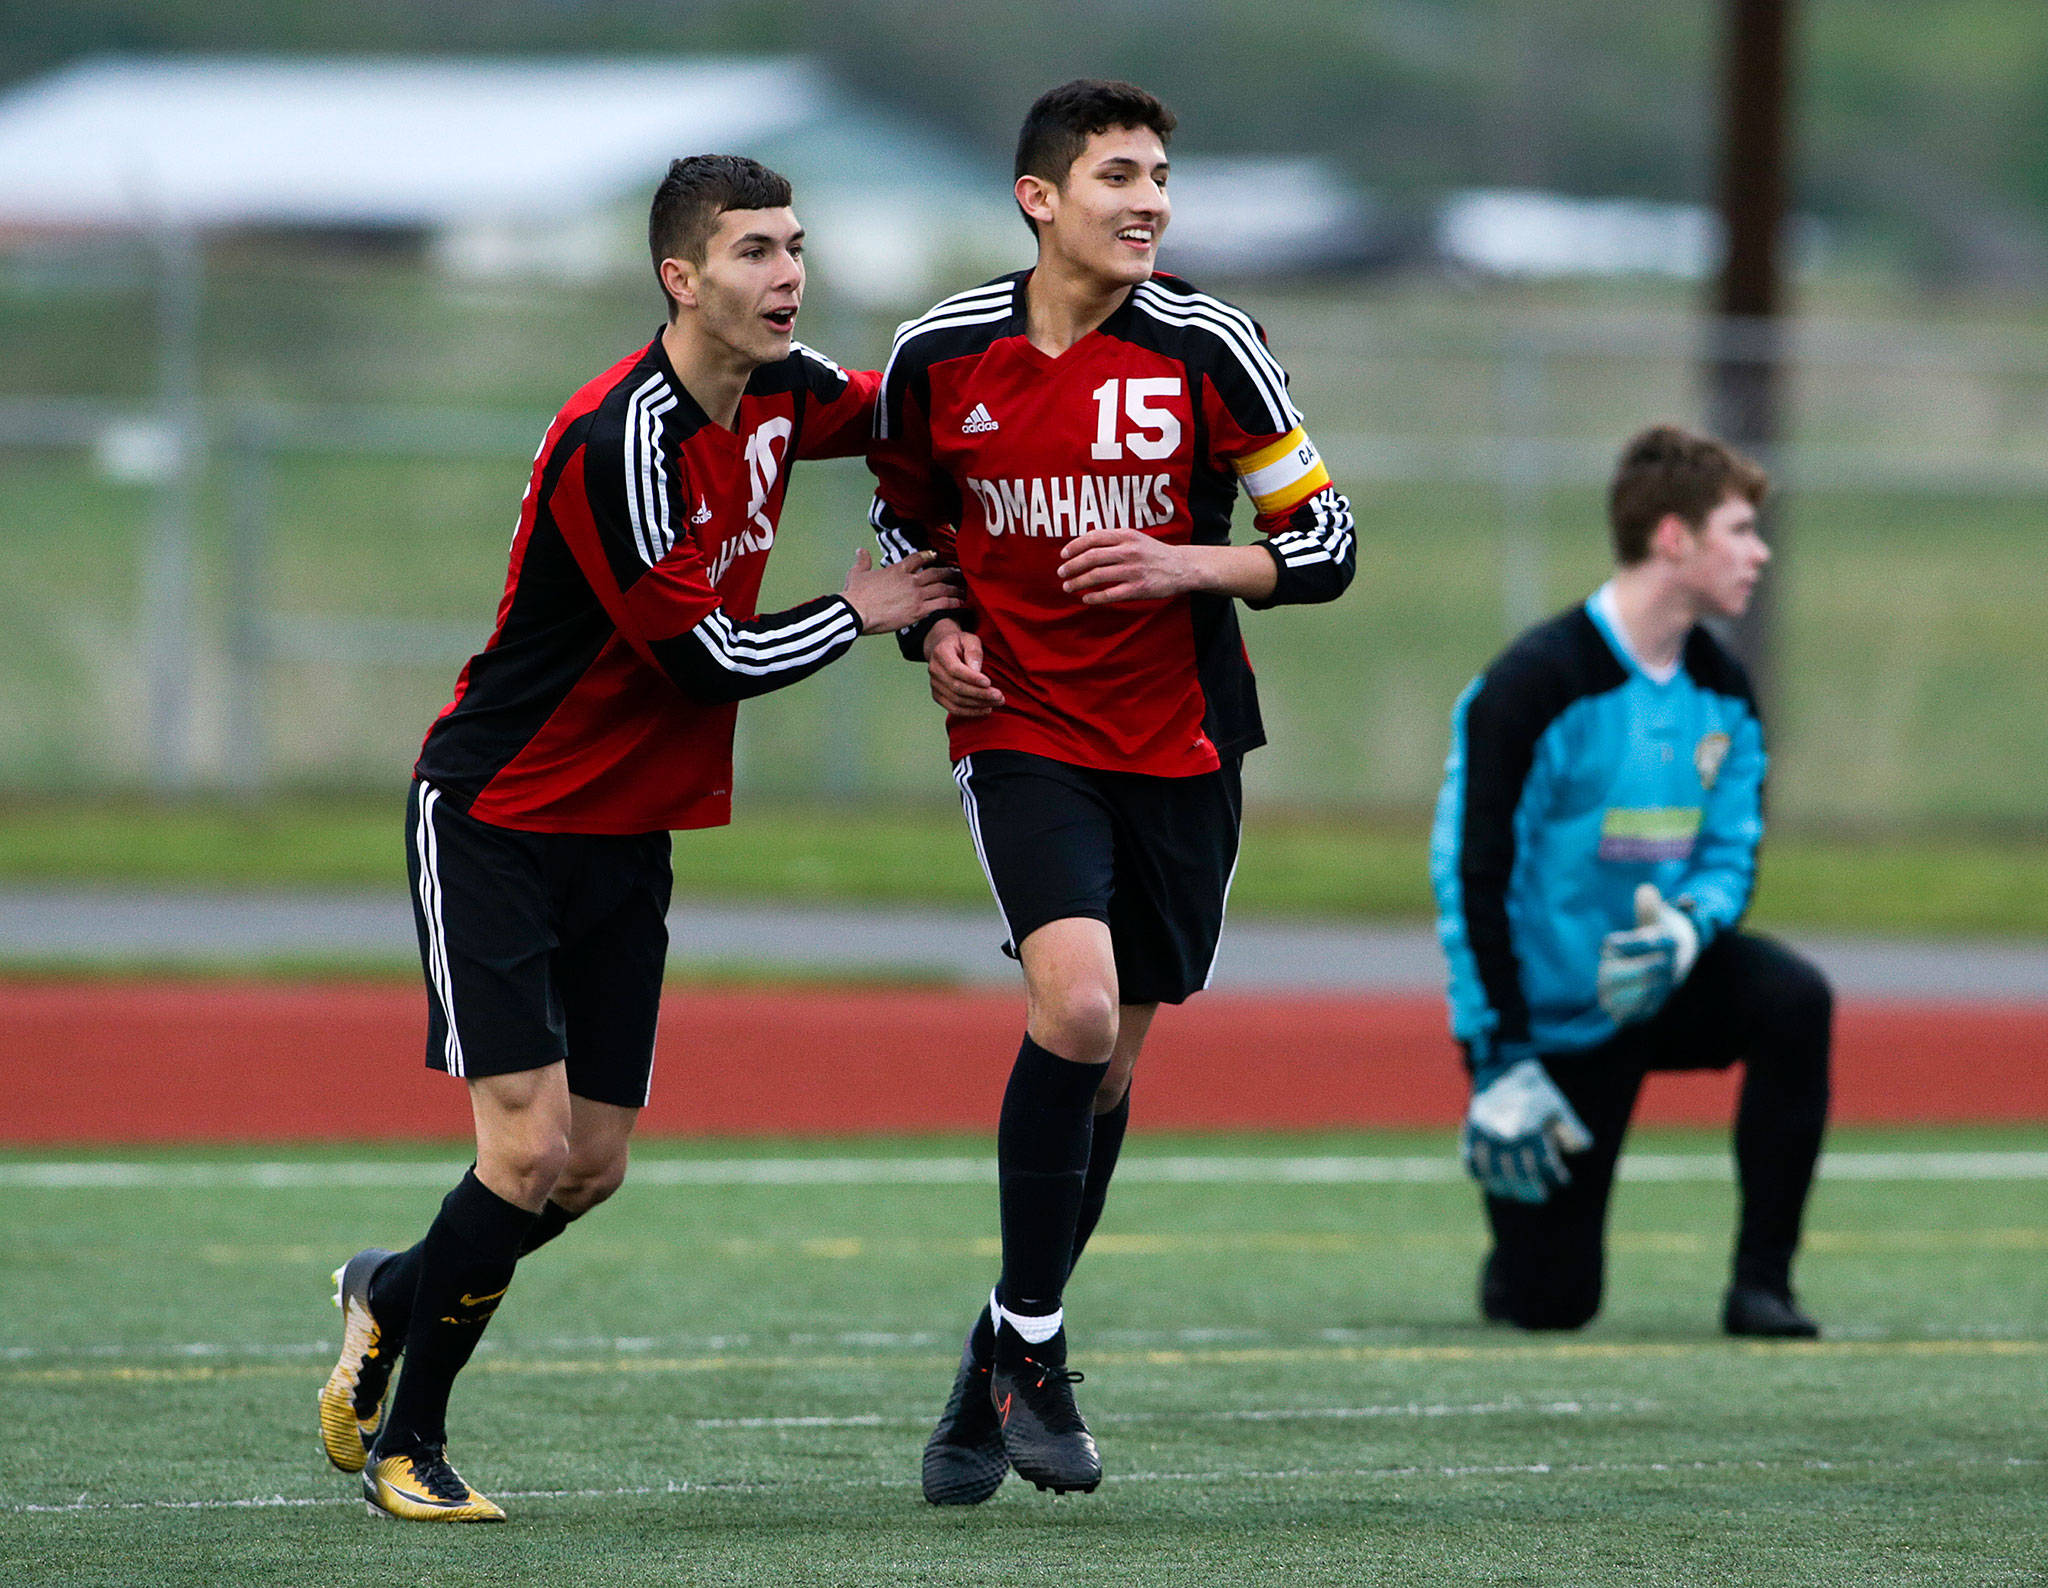 Marysville Pilchuck’s Leo Jaramillo (15) is congratulated by teammate Kyle Matson after scoring a sixth-minute goal in a 5-1 win over Everett on Friday night at Quil Ceda Stadium in Marysville. The victory clinched the second consecutive Wesco 3A/2A title for Jaramillo and the Tomahawks. (Andy Bronson / The Herald)